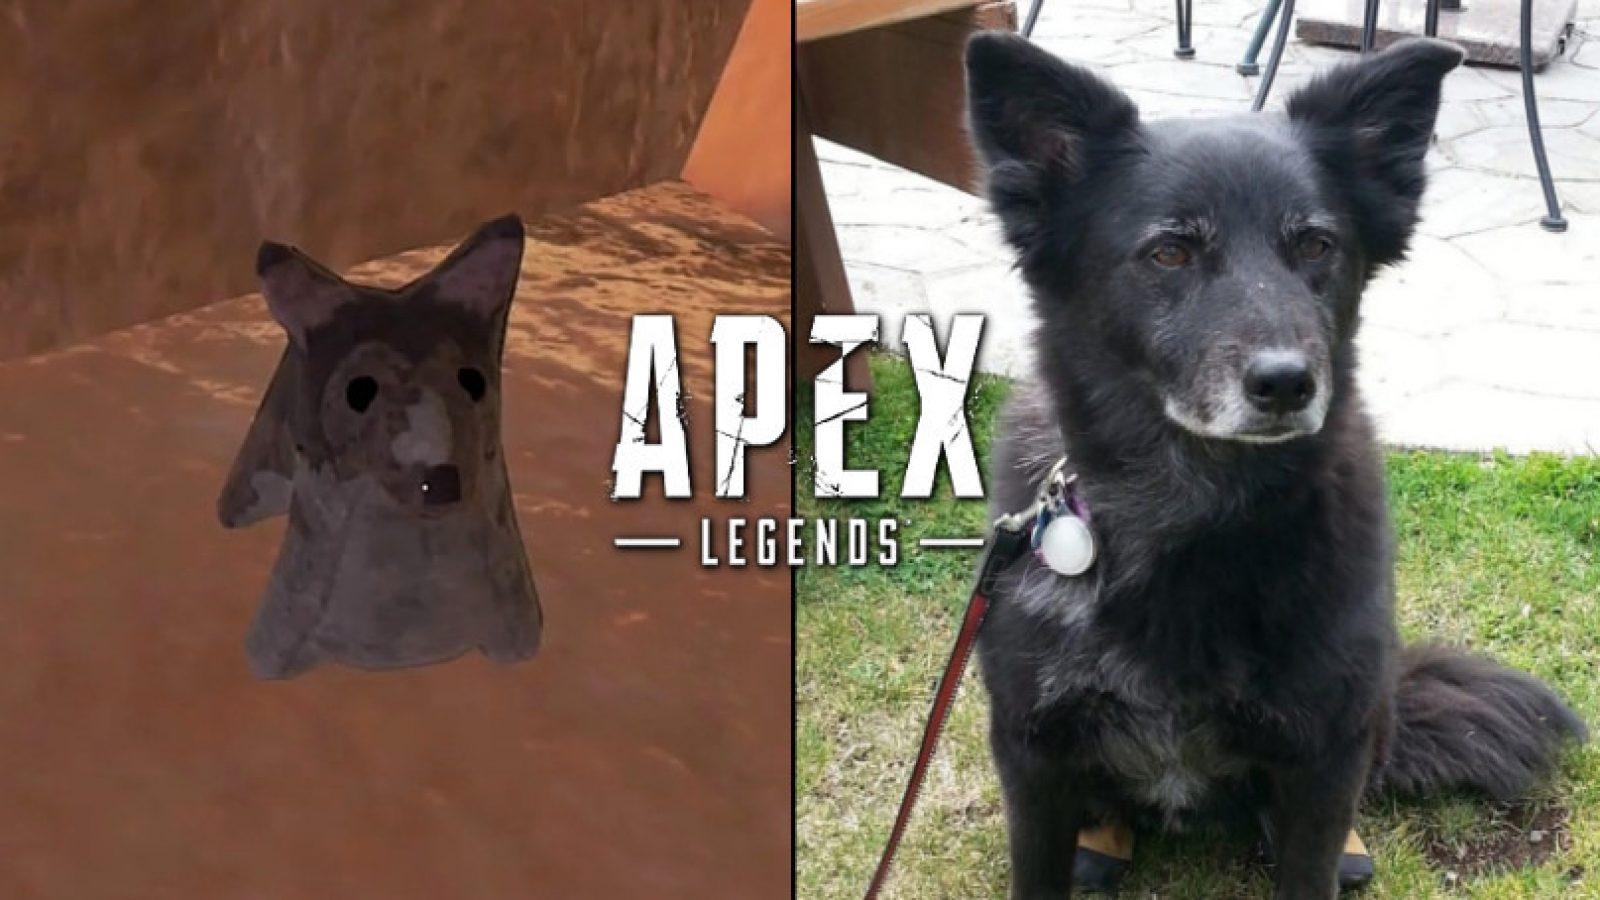 https://www.dexerto.com/cdn-cgi/image/width=3840,quality=75,format=auto/https://editors.dexerto.com/wp-content/uploads/thumbnails/_thumbnailLarge/stuffed-dog-puppy-toy-apex-legends-easter-egg-how-to-find.jpg